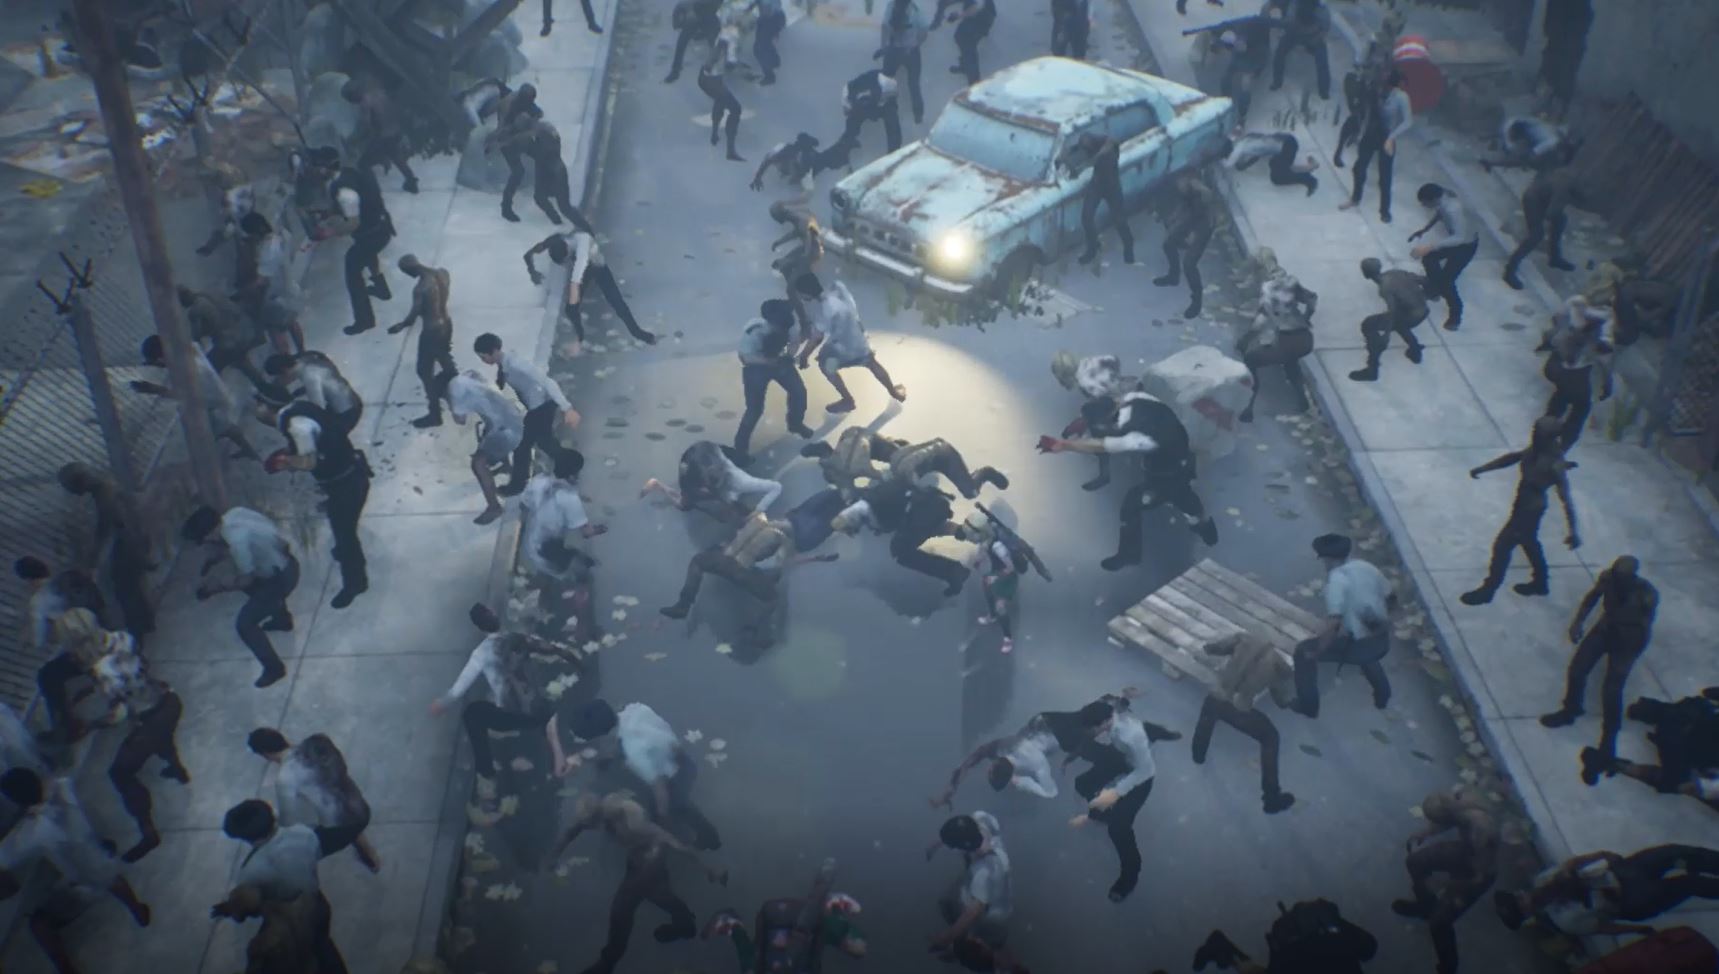 A scene of zombies in a street with a ruined car